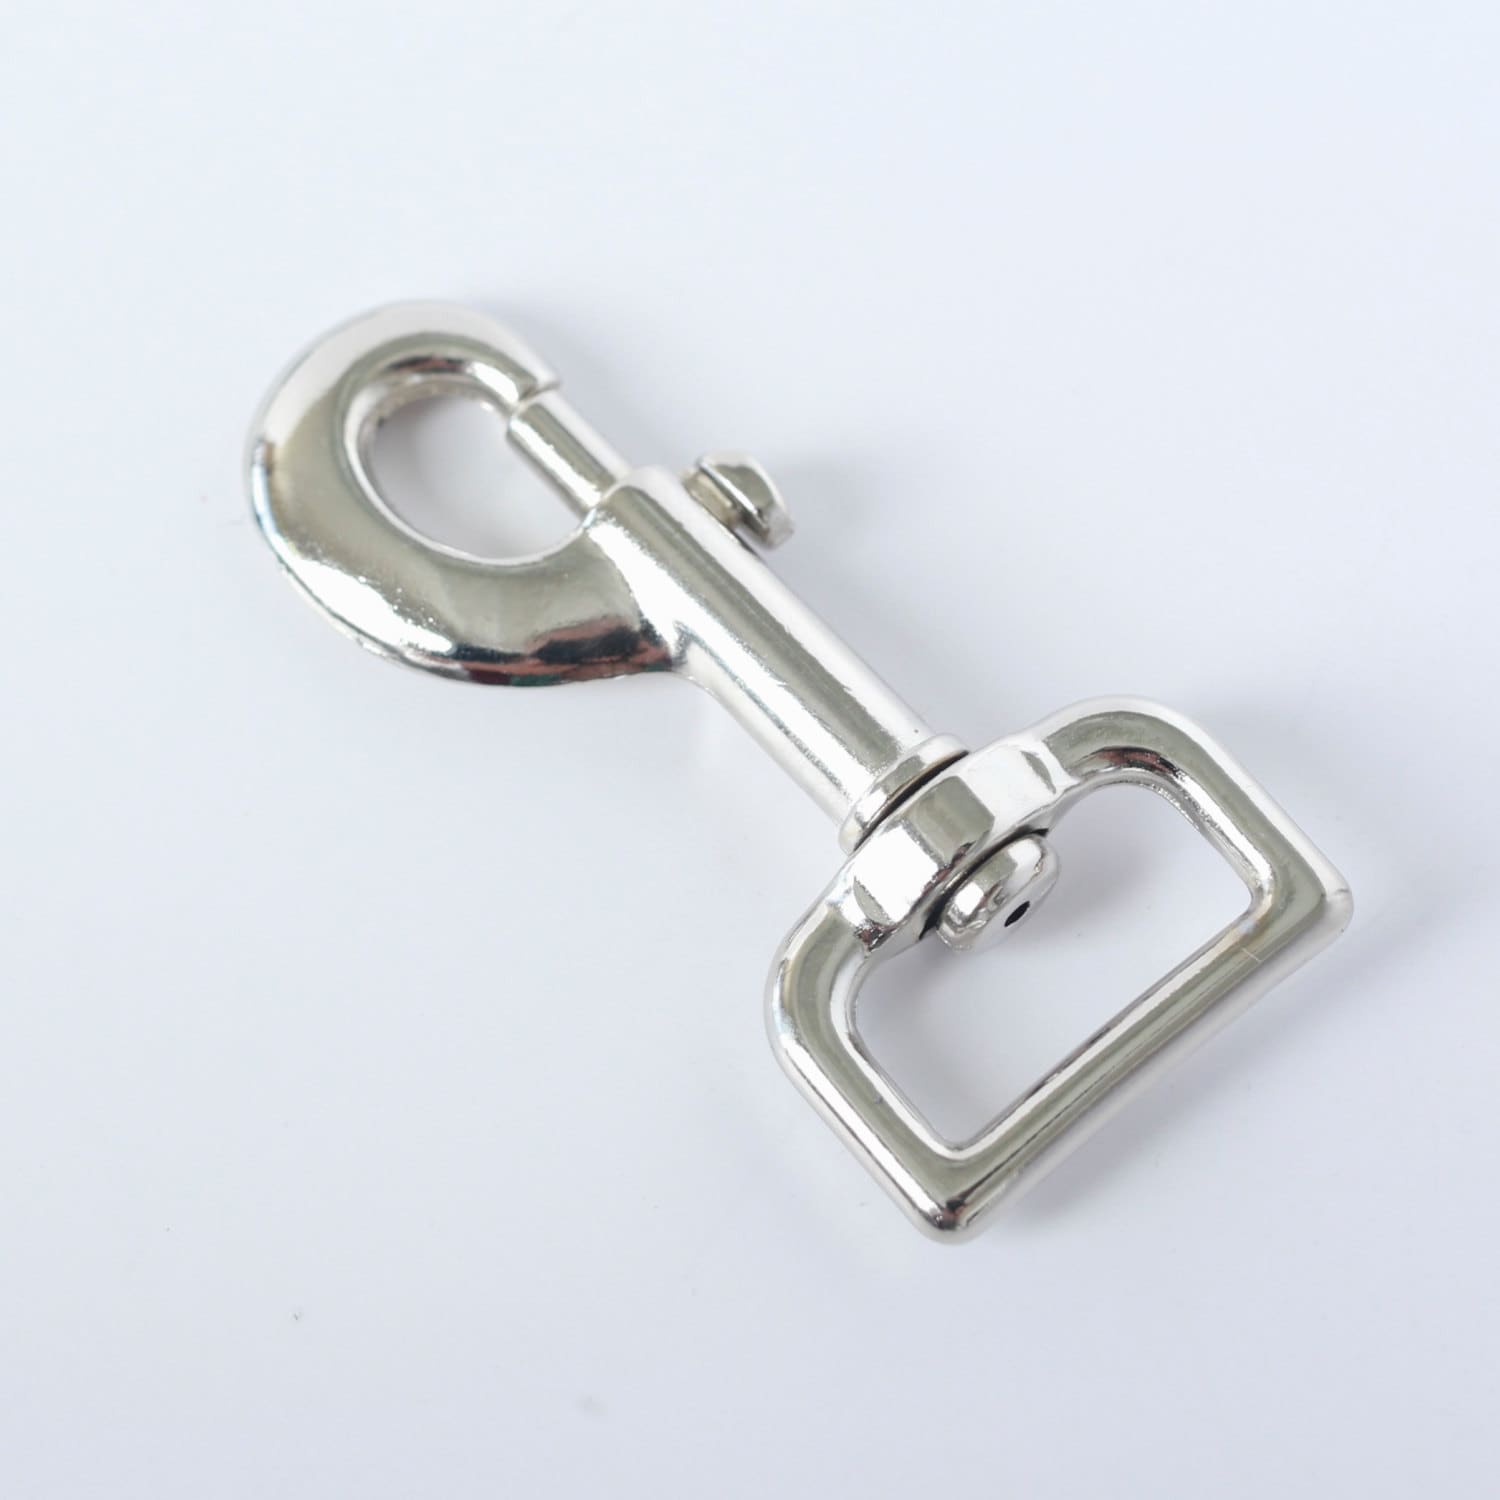 Partrade Hook Snap Durable Stainless Steel Nickel Plated Strap Connector Np 5/8